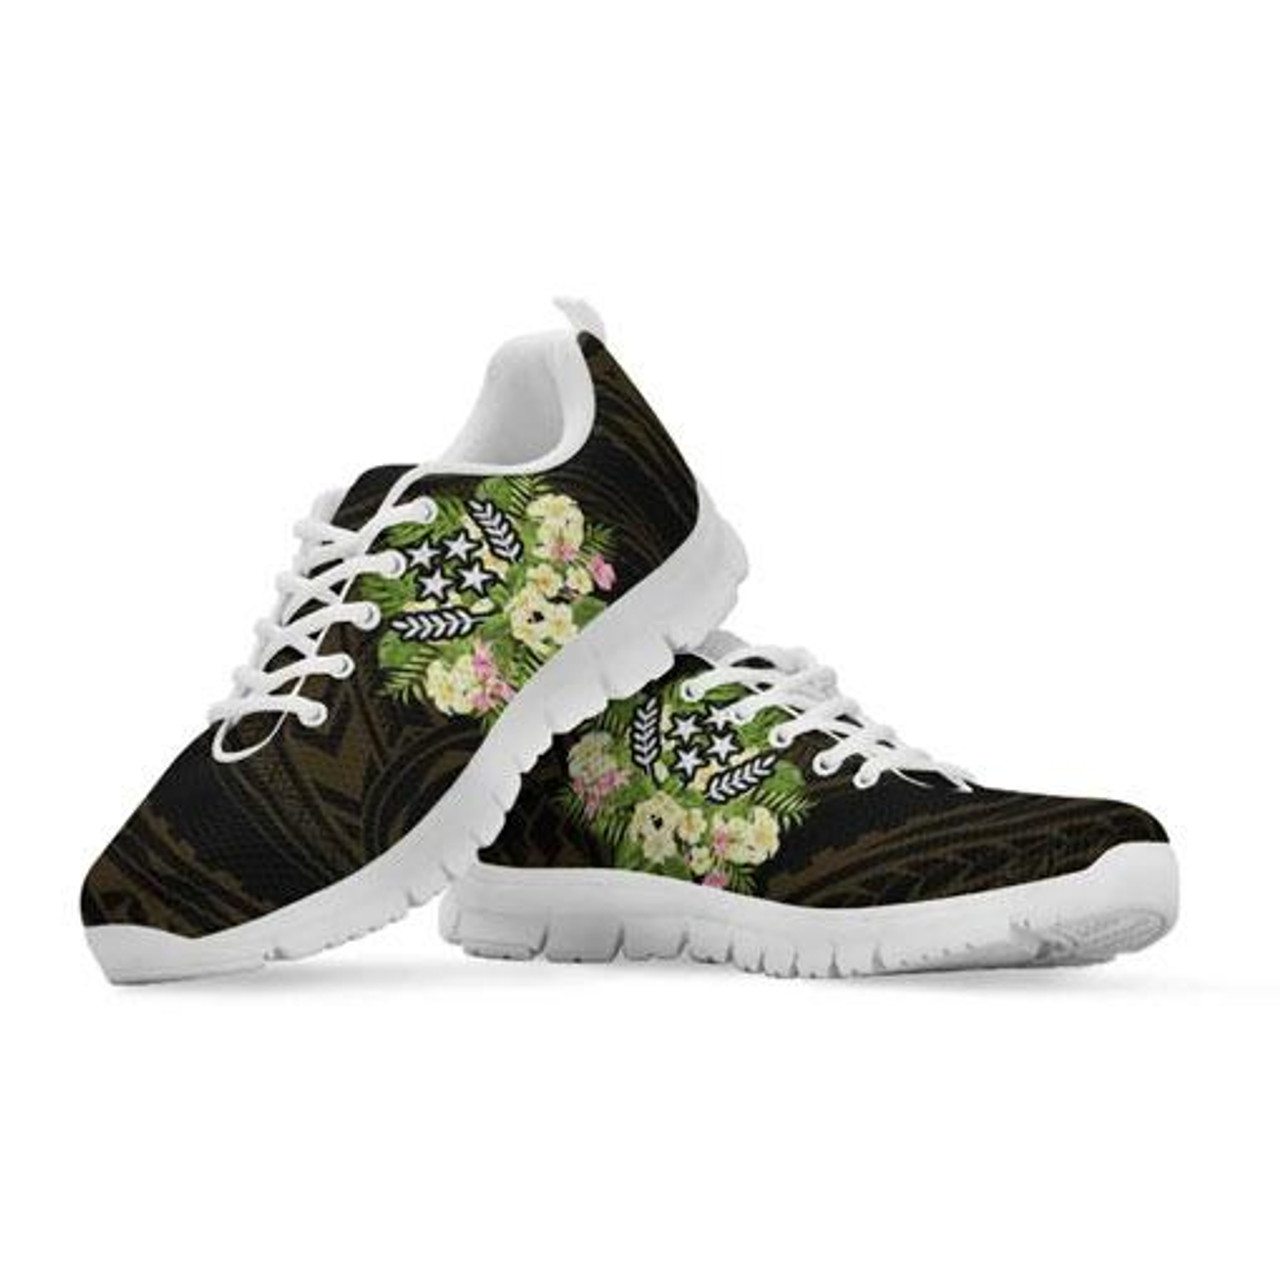 Kosrae State Sneakers - Polynesian Gold Patterns Collection 7